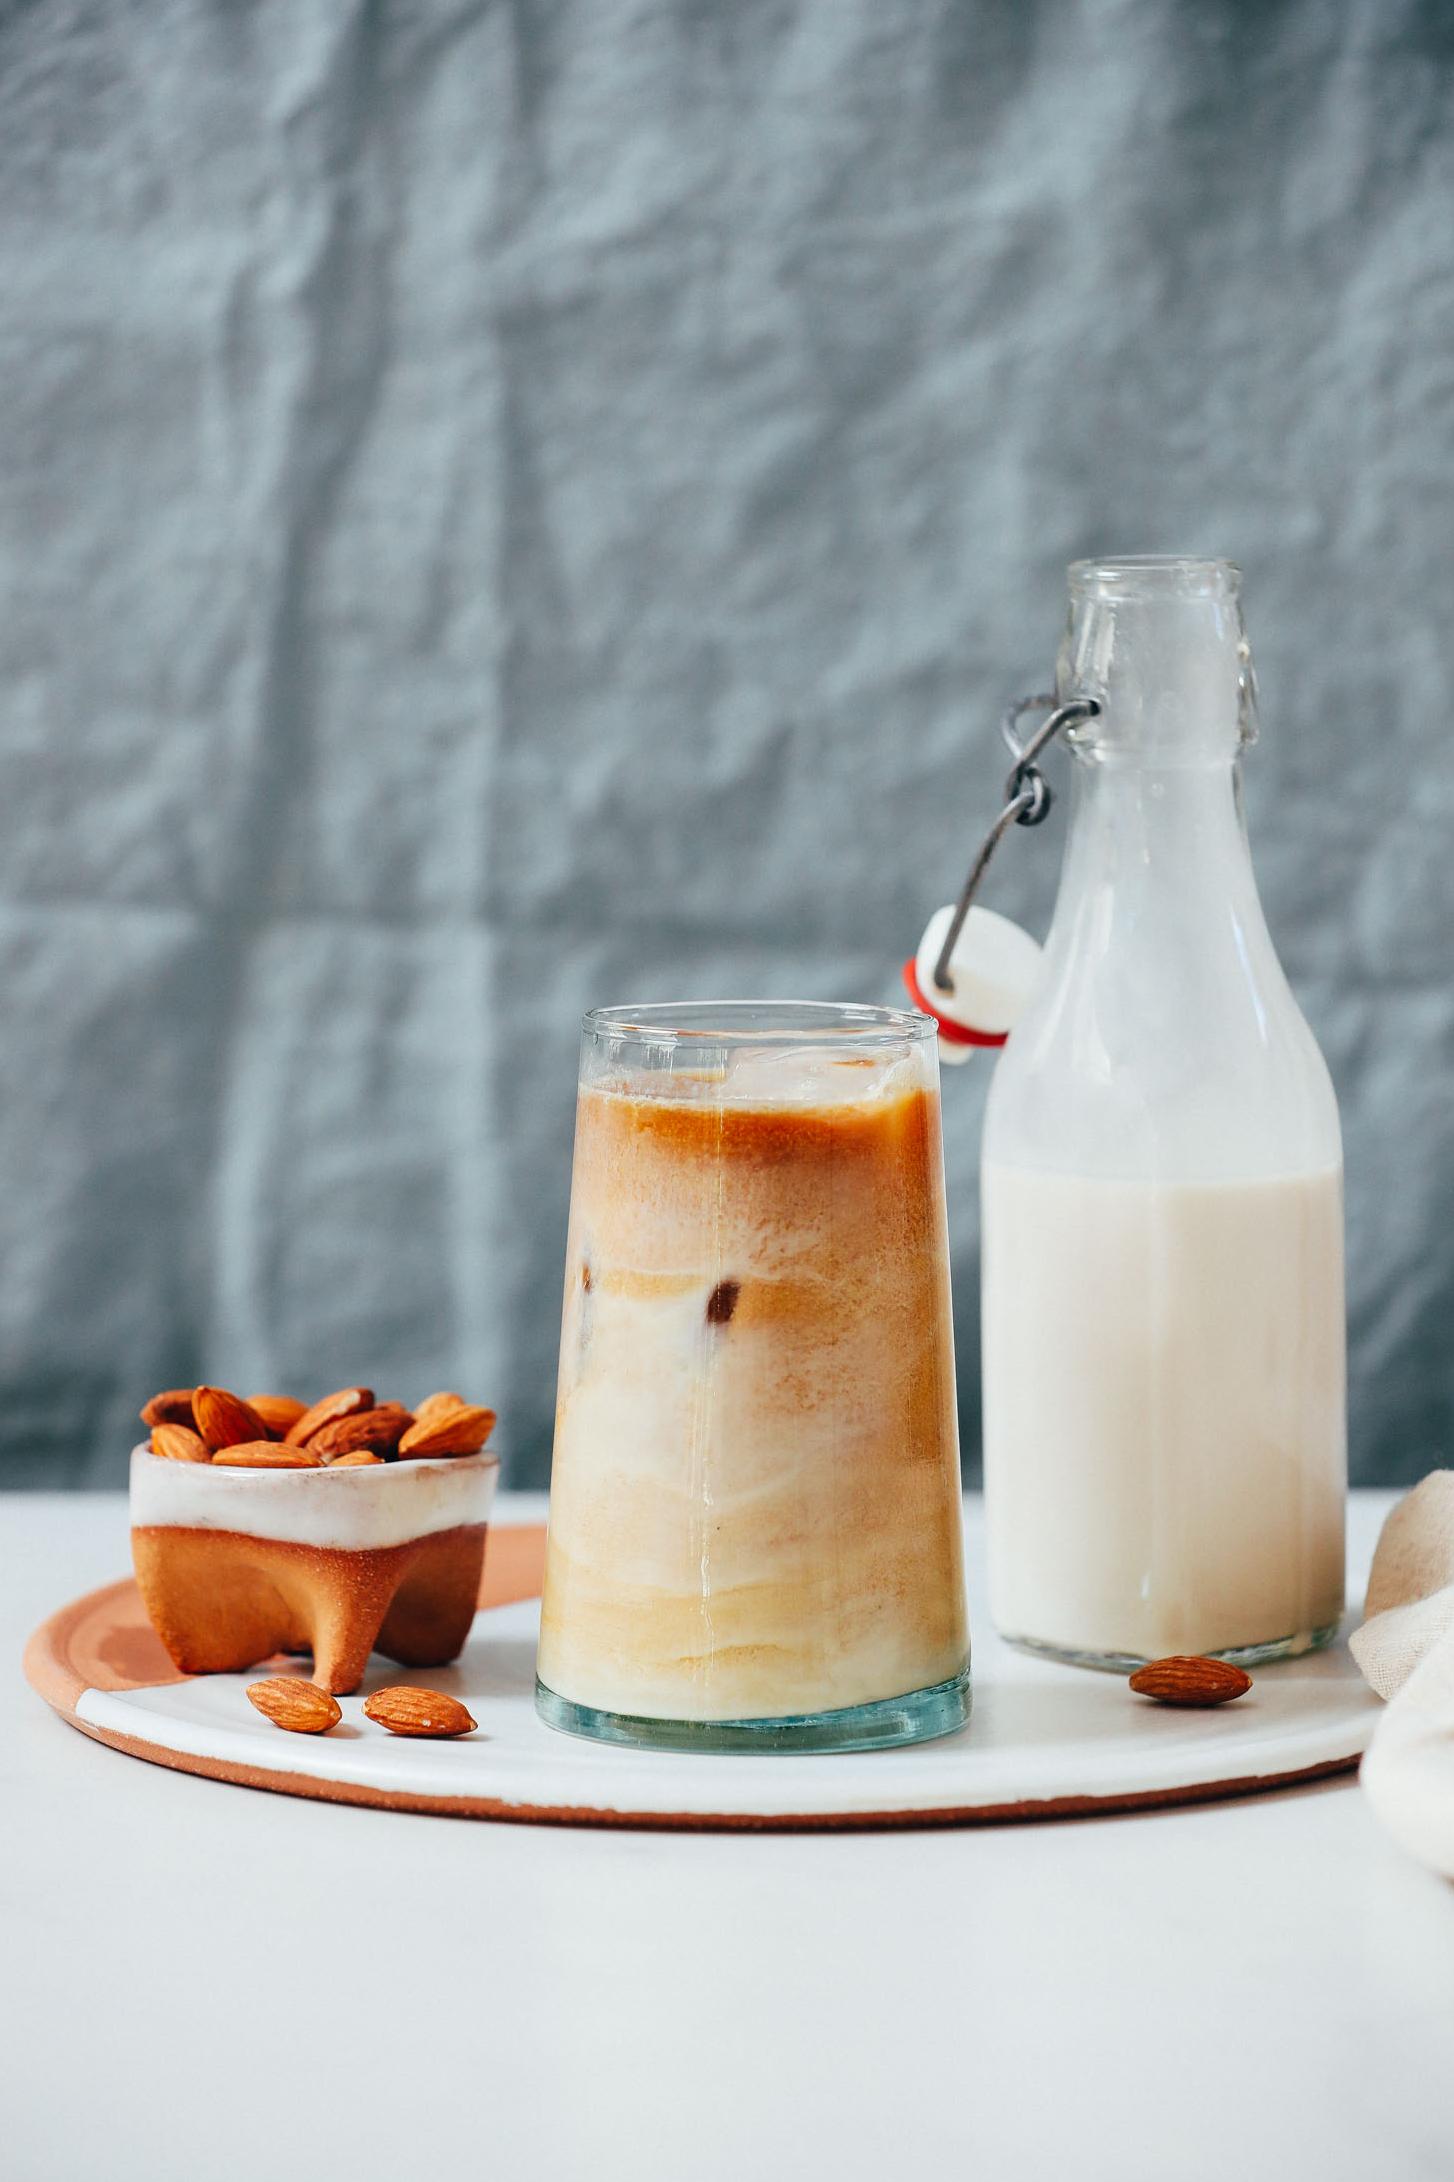  Looking for a dairy-free option? Try this homemade Almond Coffee Creamer Mix!